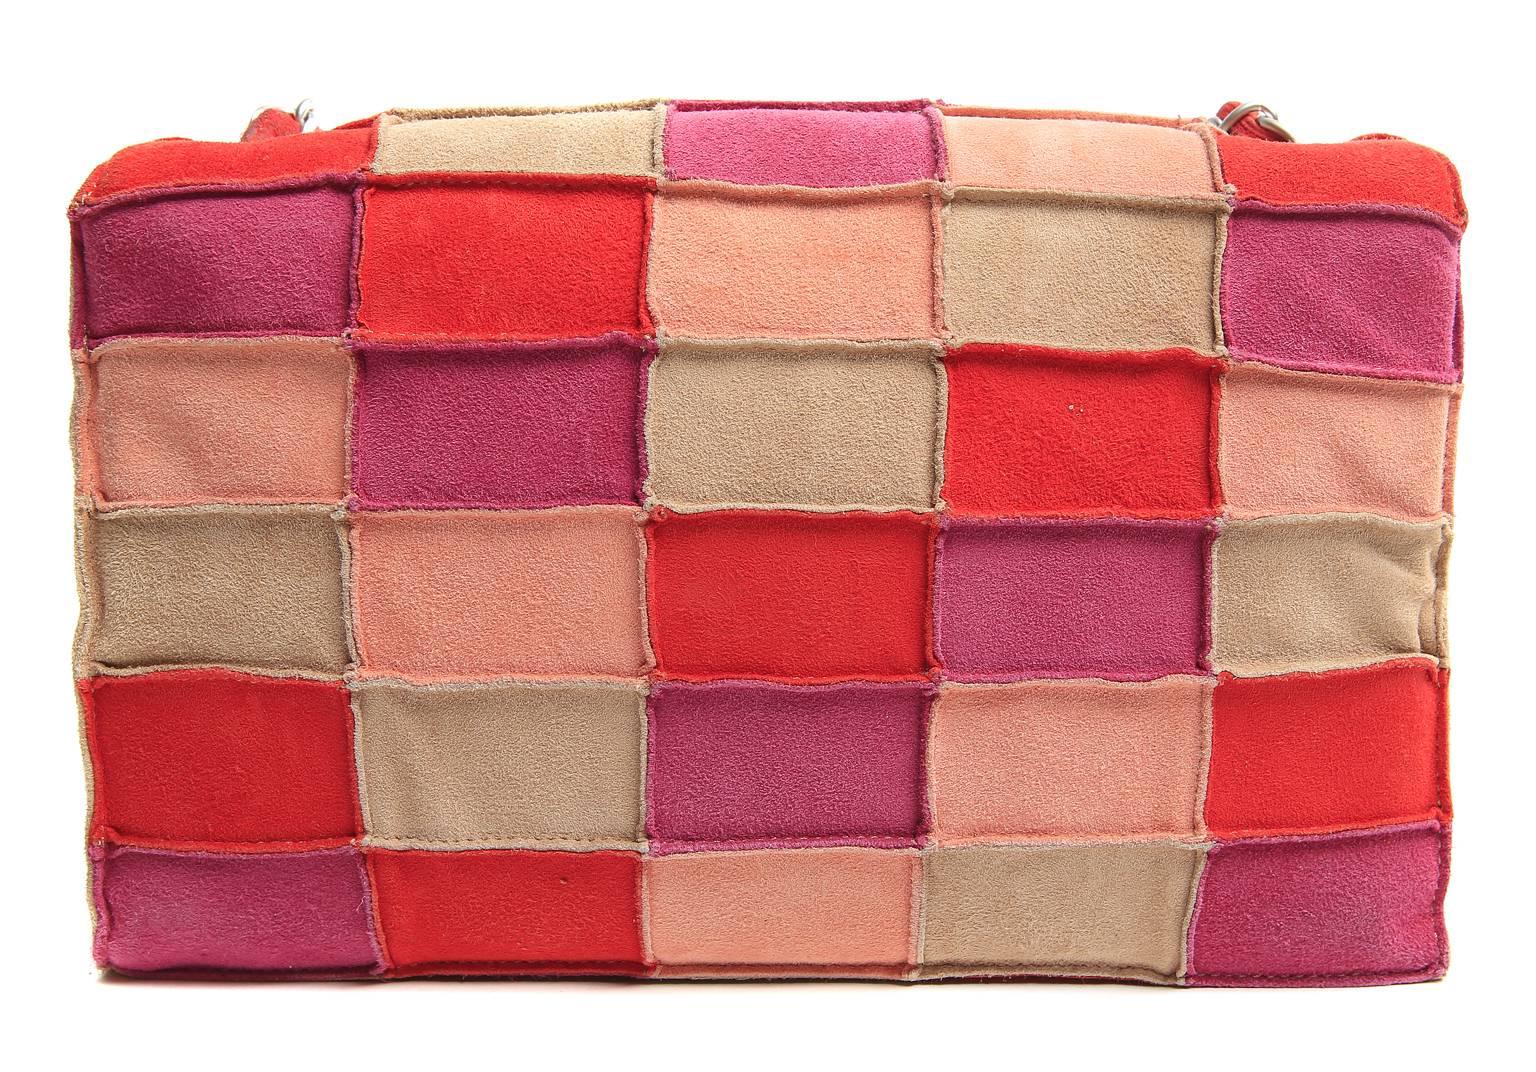 Chanel Multicolor Suede Patchwork Flap Bag
 Pristine- most likely never carried.  
Featuring an array of warm toned cheerful colored suede blocks, this unique Chanel is a fantastic find.
 
Sublimely soft suede is stitched in a rectangular color